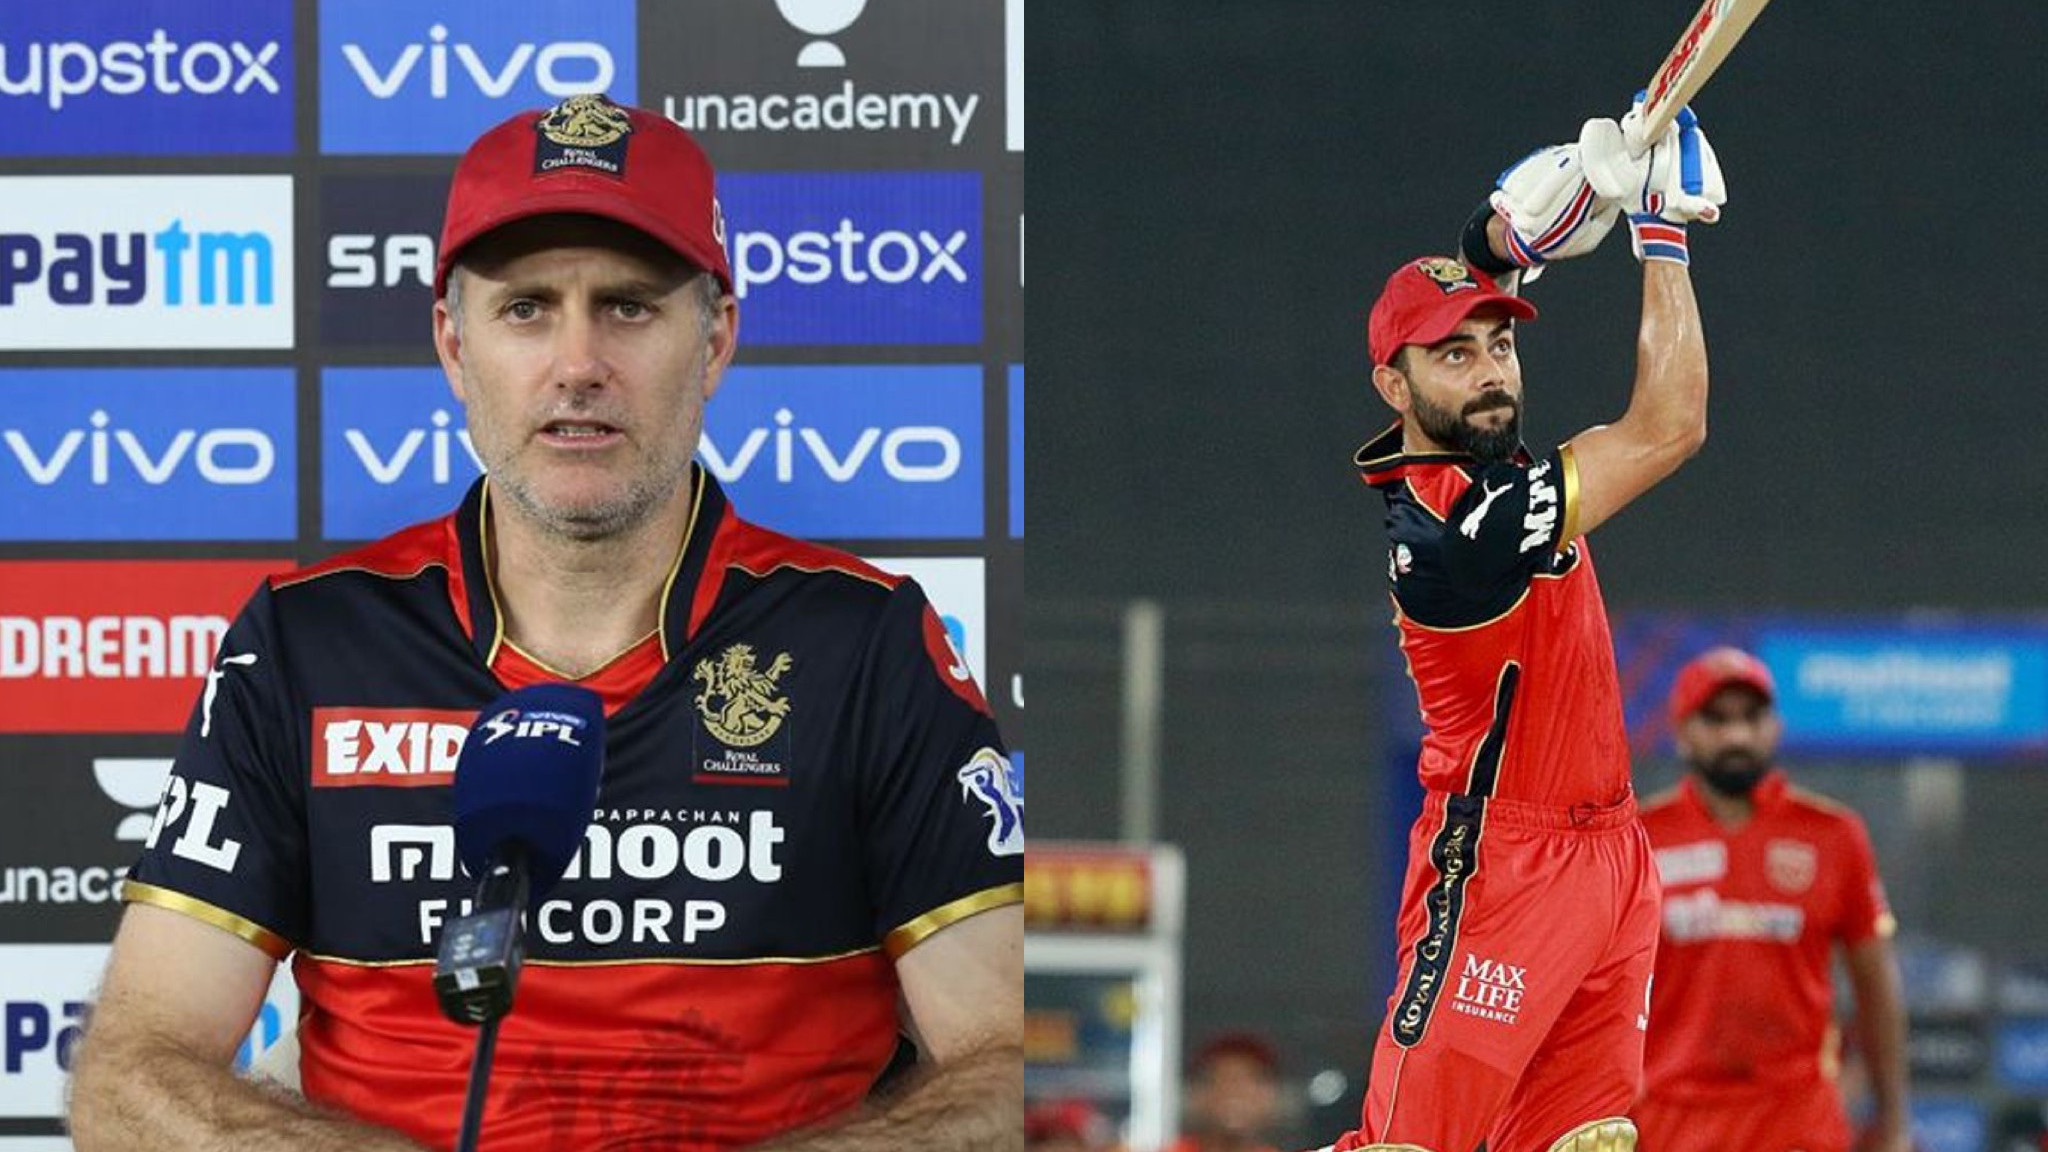 IPL 2021: Simon Katich says Virat Kohli is the most professional player he has ever seen